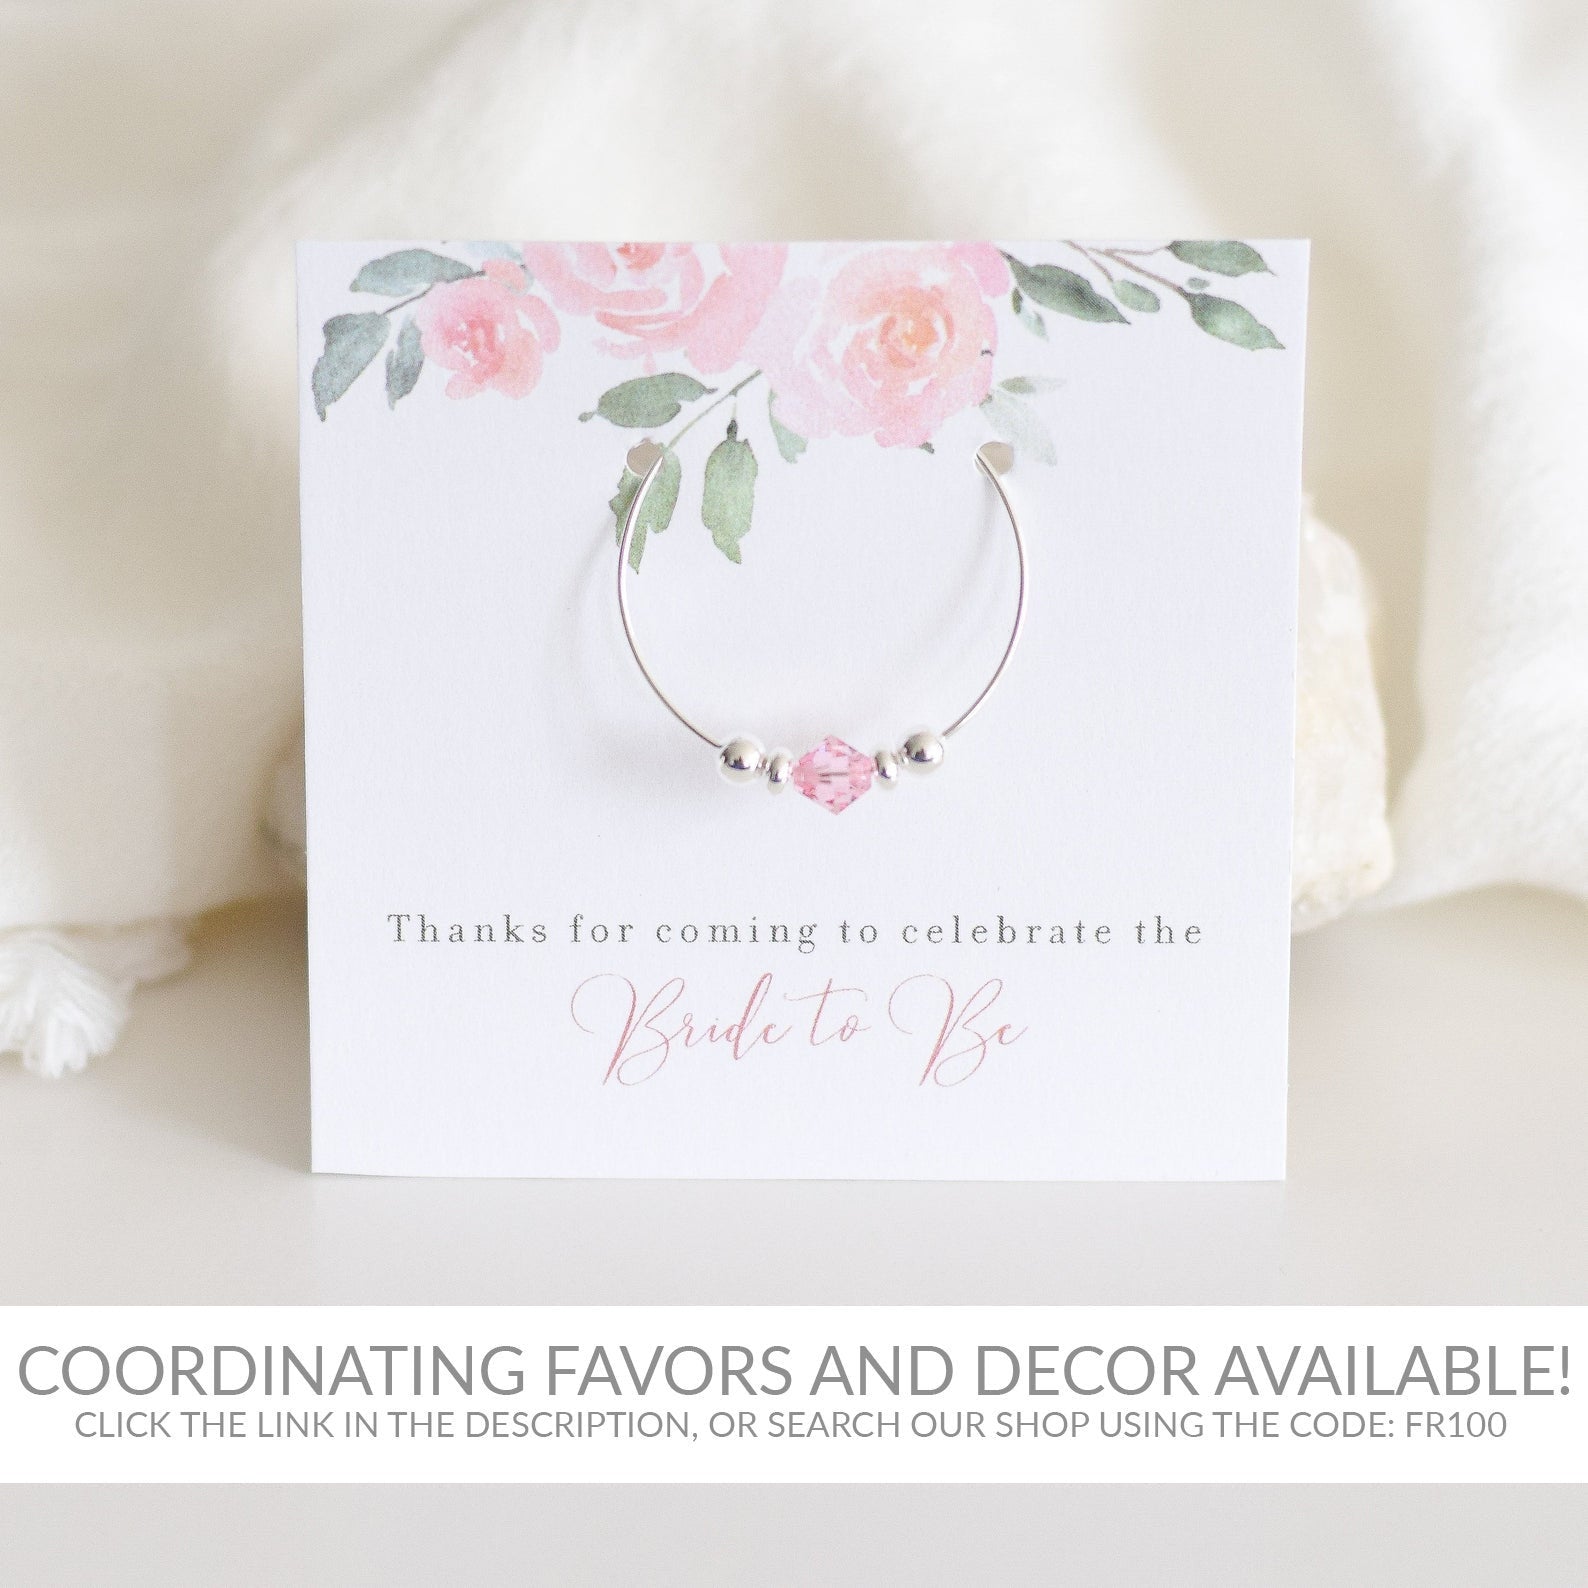 Pink Floral Bridal Shower Favors For Guests, Spiral Hair Ties - FR100 - @PlumPolkaDot 